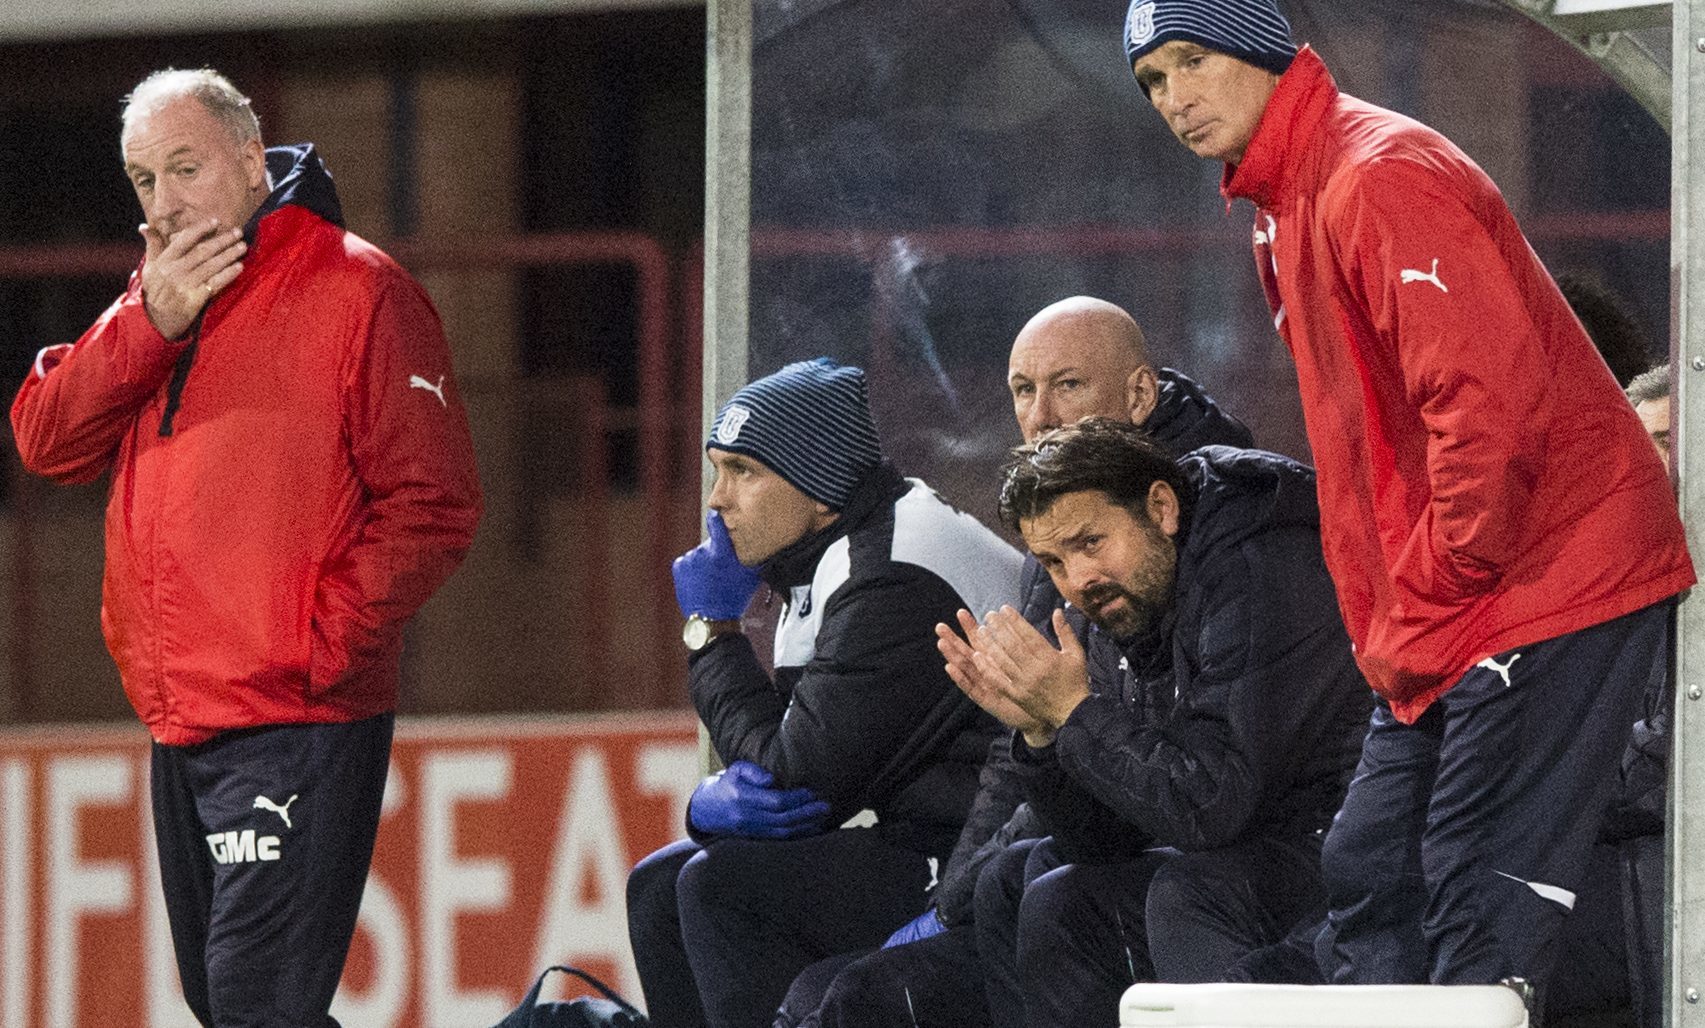 Despairing looks from the Dundee bench during the defeat to Partick Thistle.